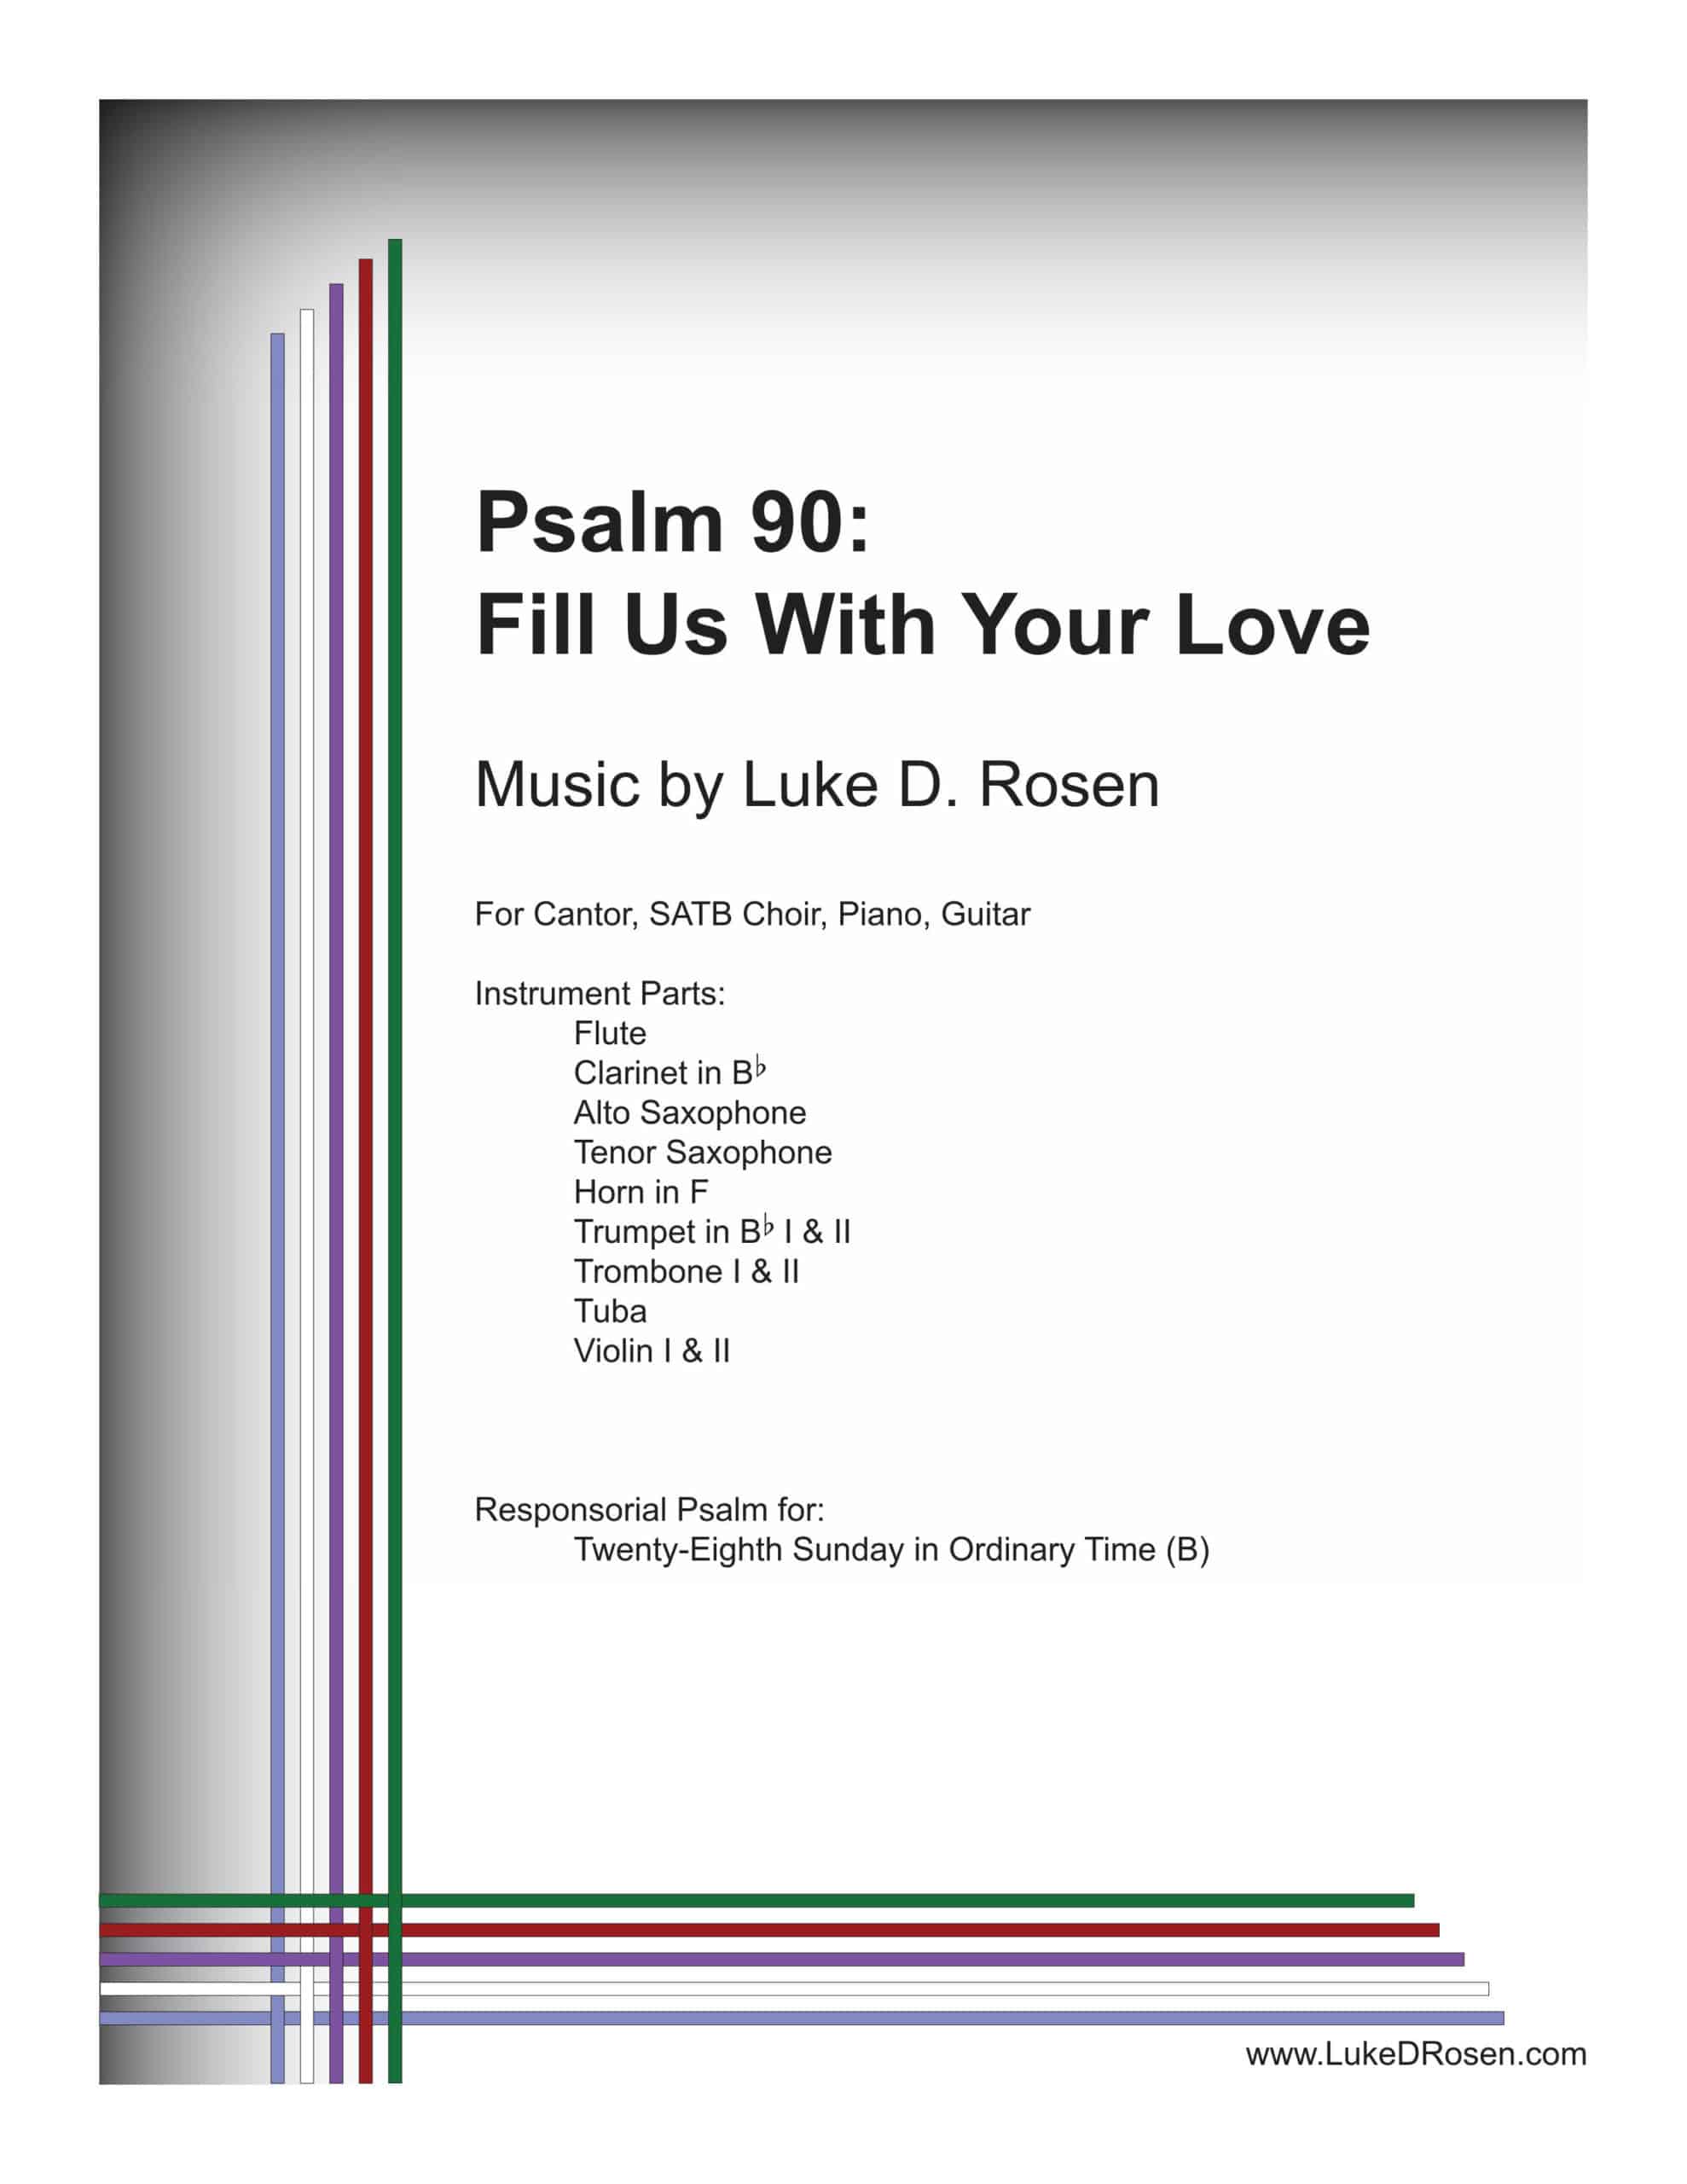 Psalm 90 – Fill Us With Your Love (Rosen)